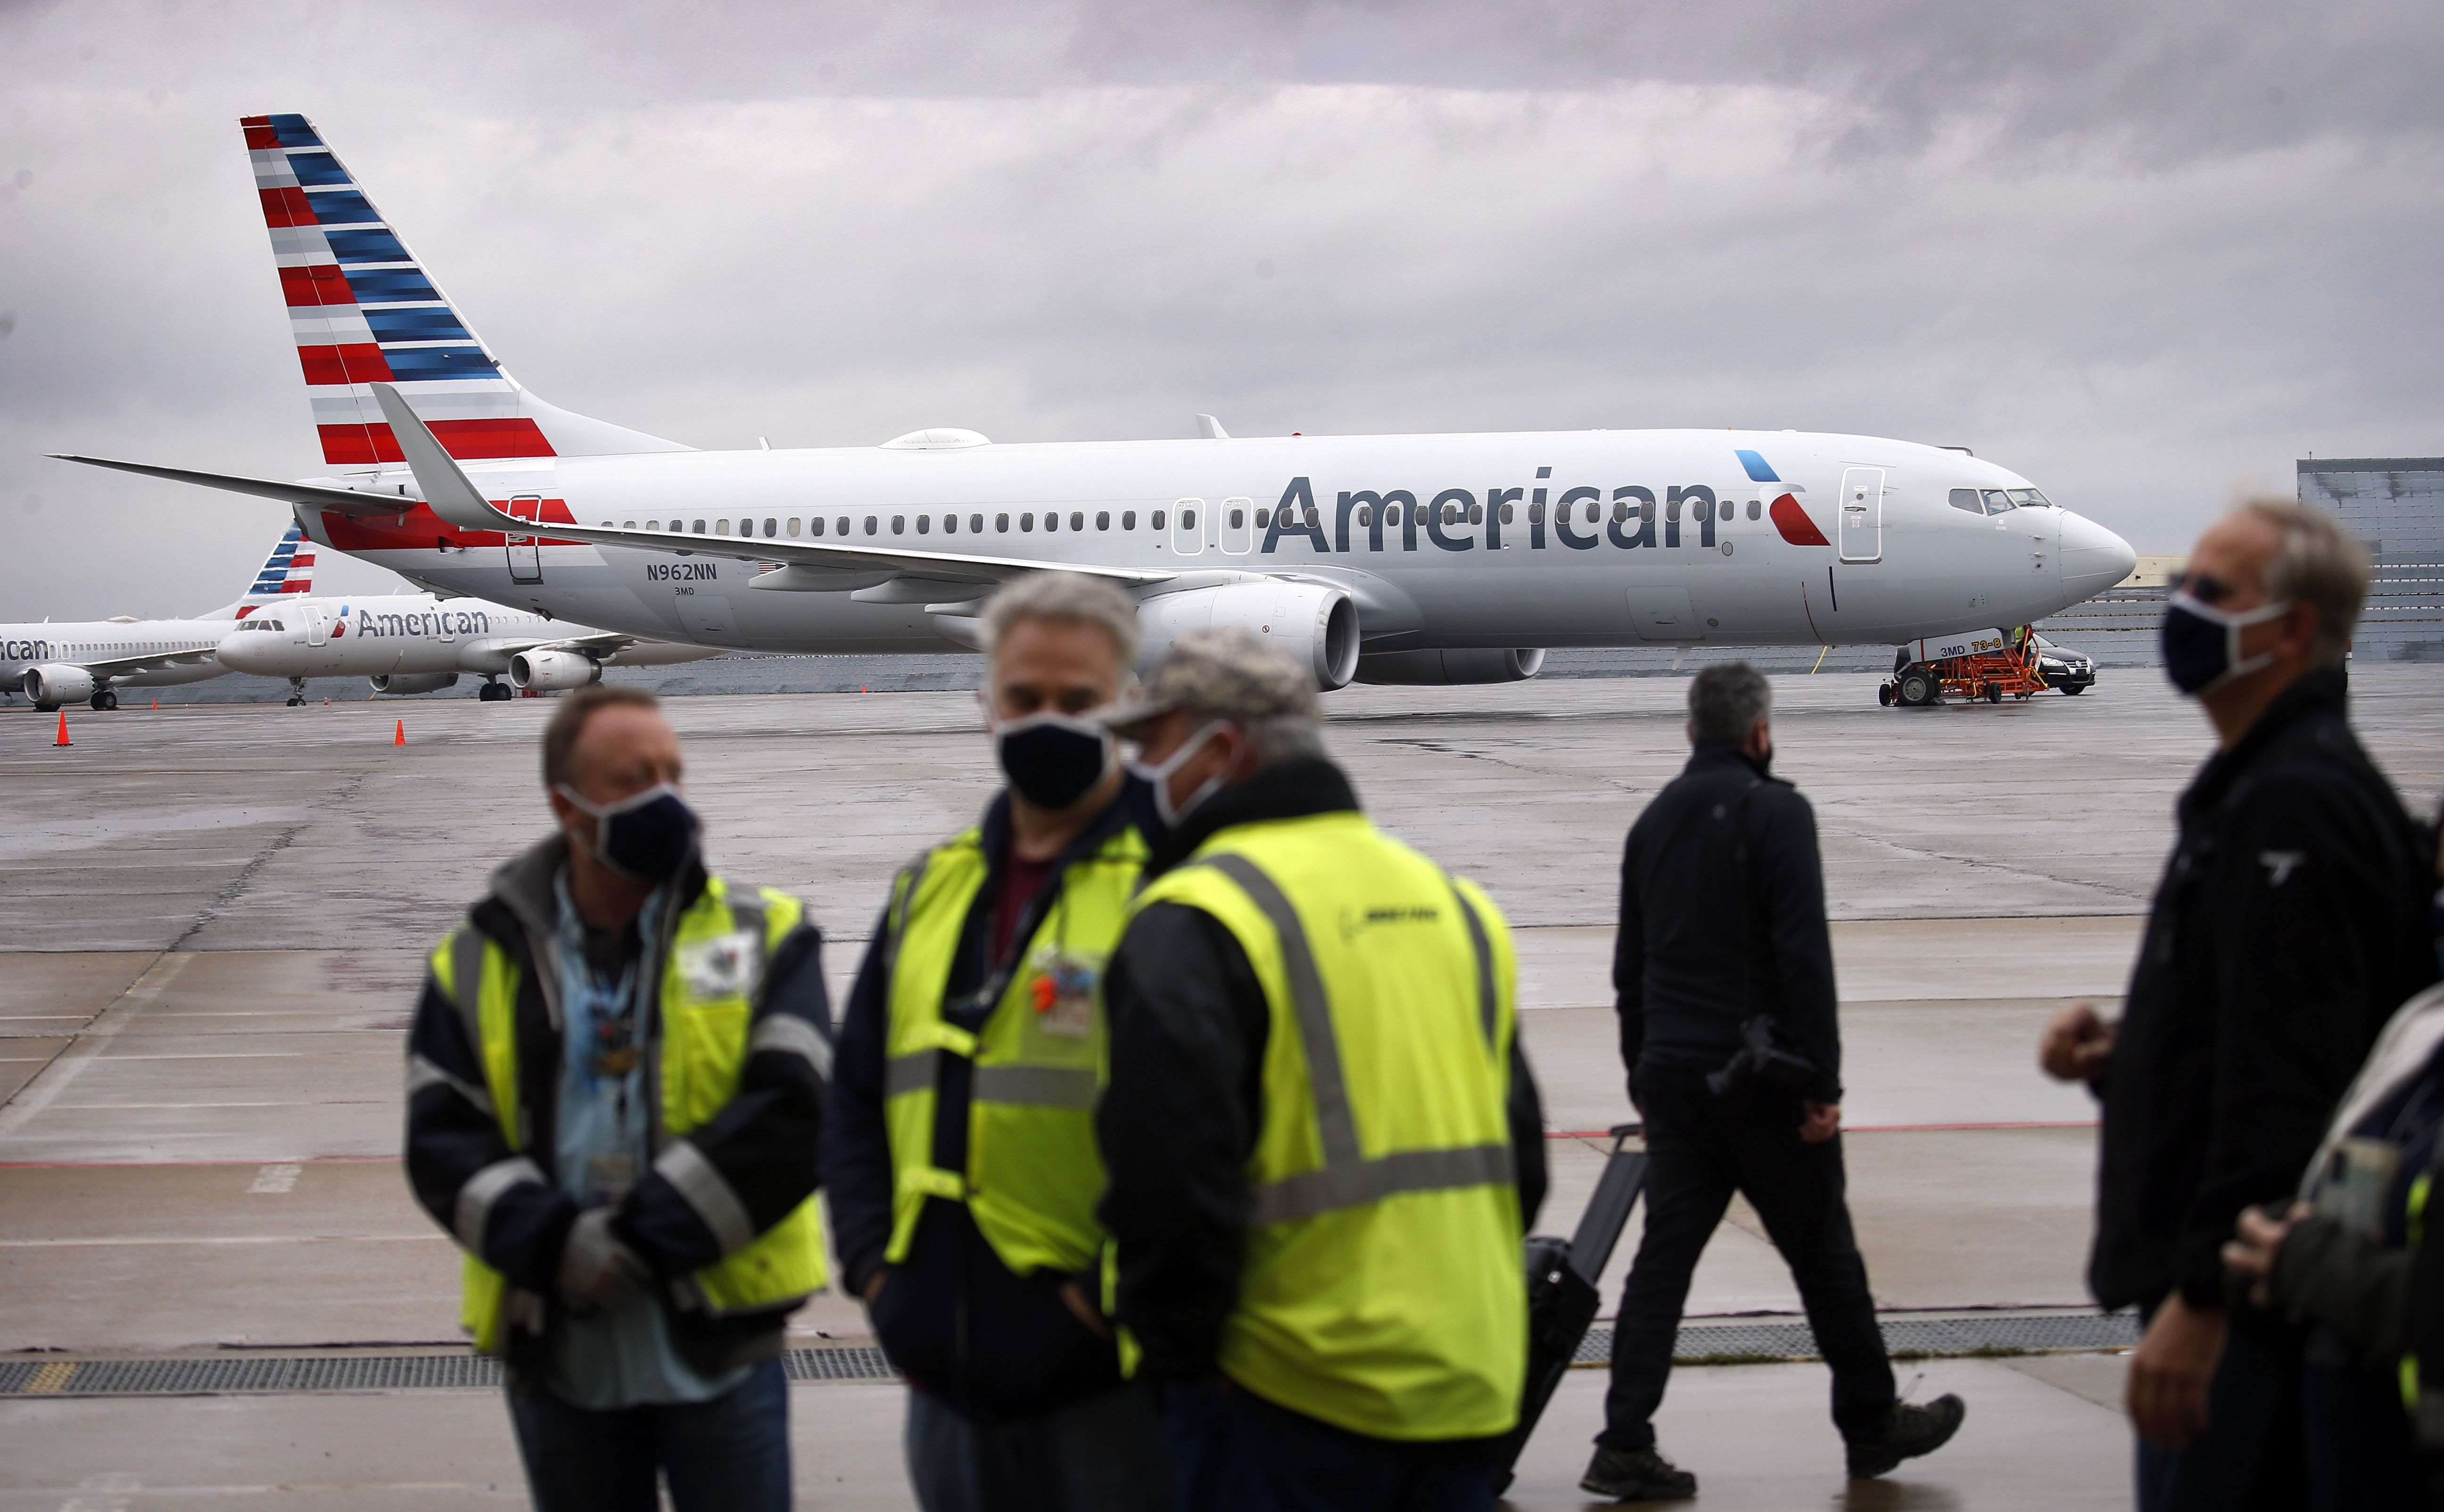 Paychecks By Christmas Eve American Airlines Awaits Stimulus With Plans To Recall Furloughed Workers